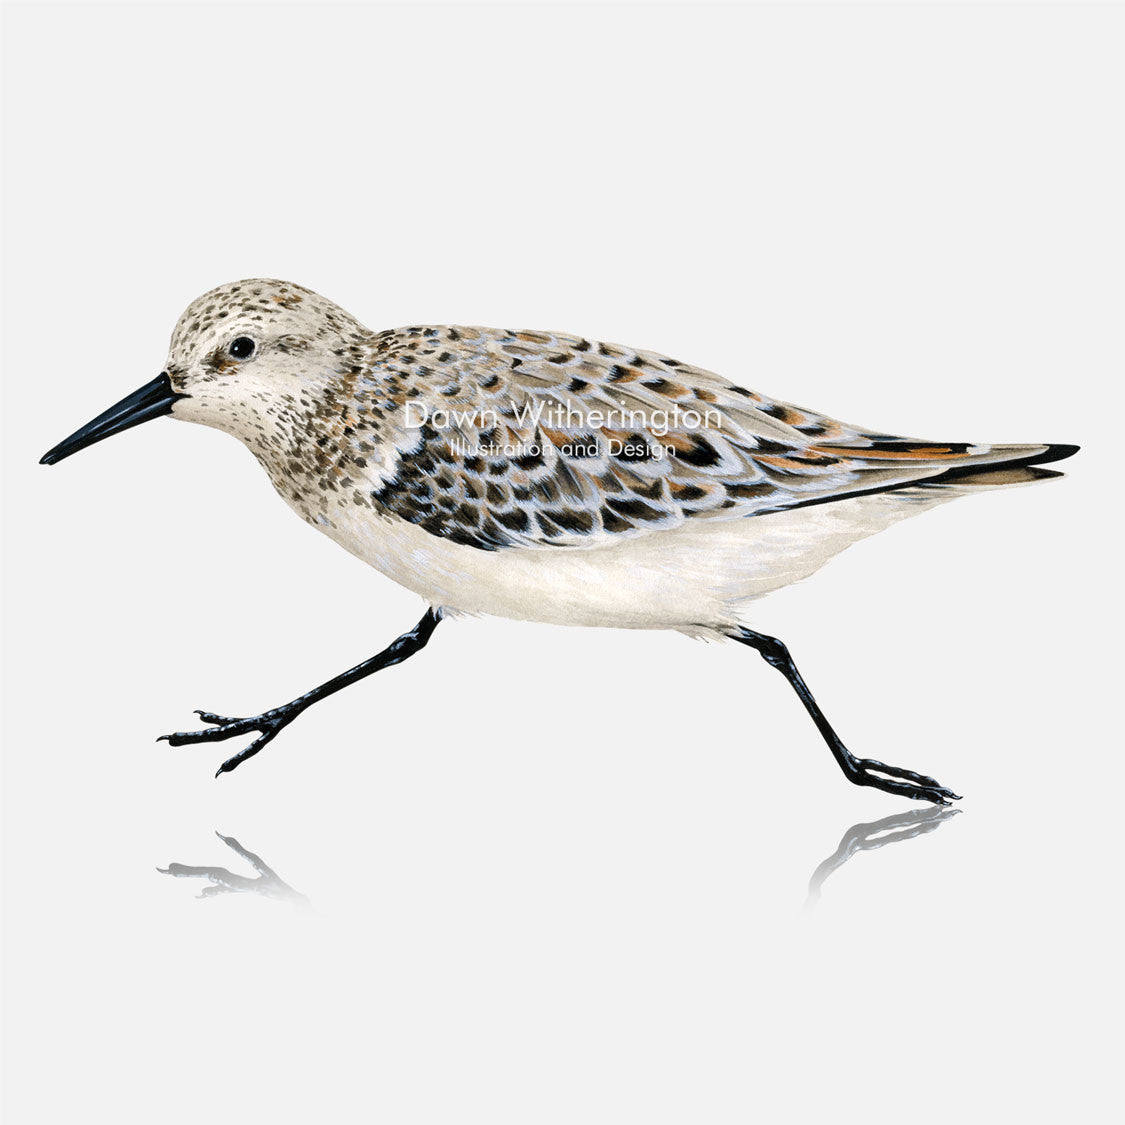 This beautiful illustration of a sanderling, Calidris alba, is biologically accurate in detail.